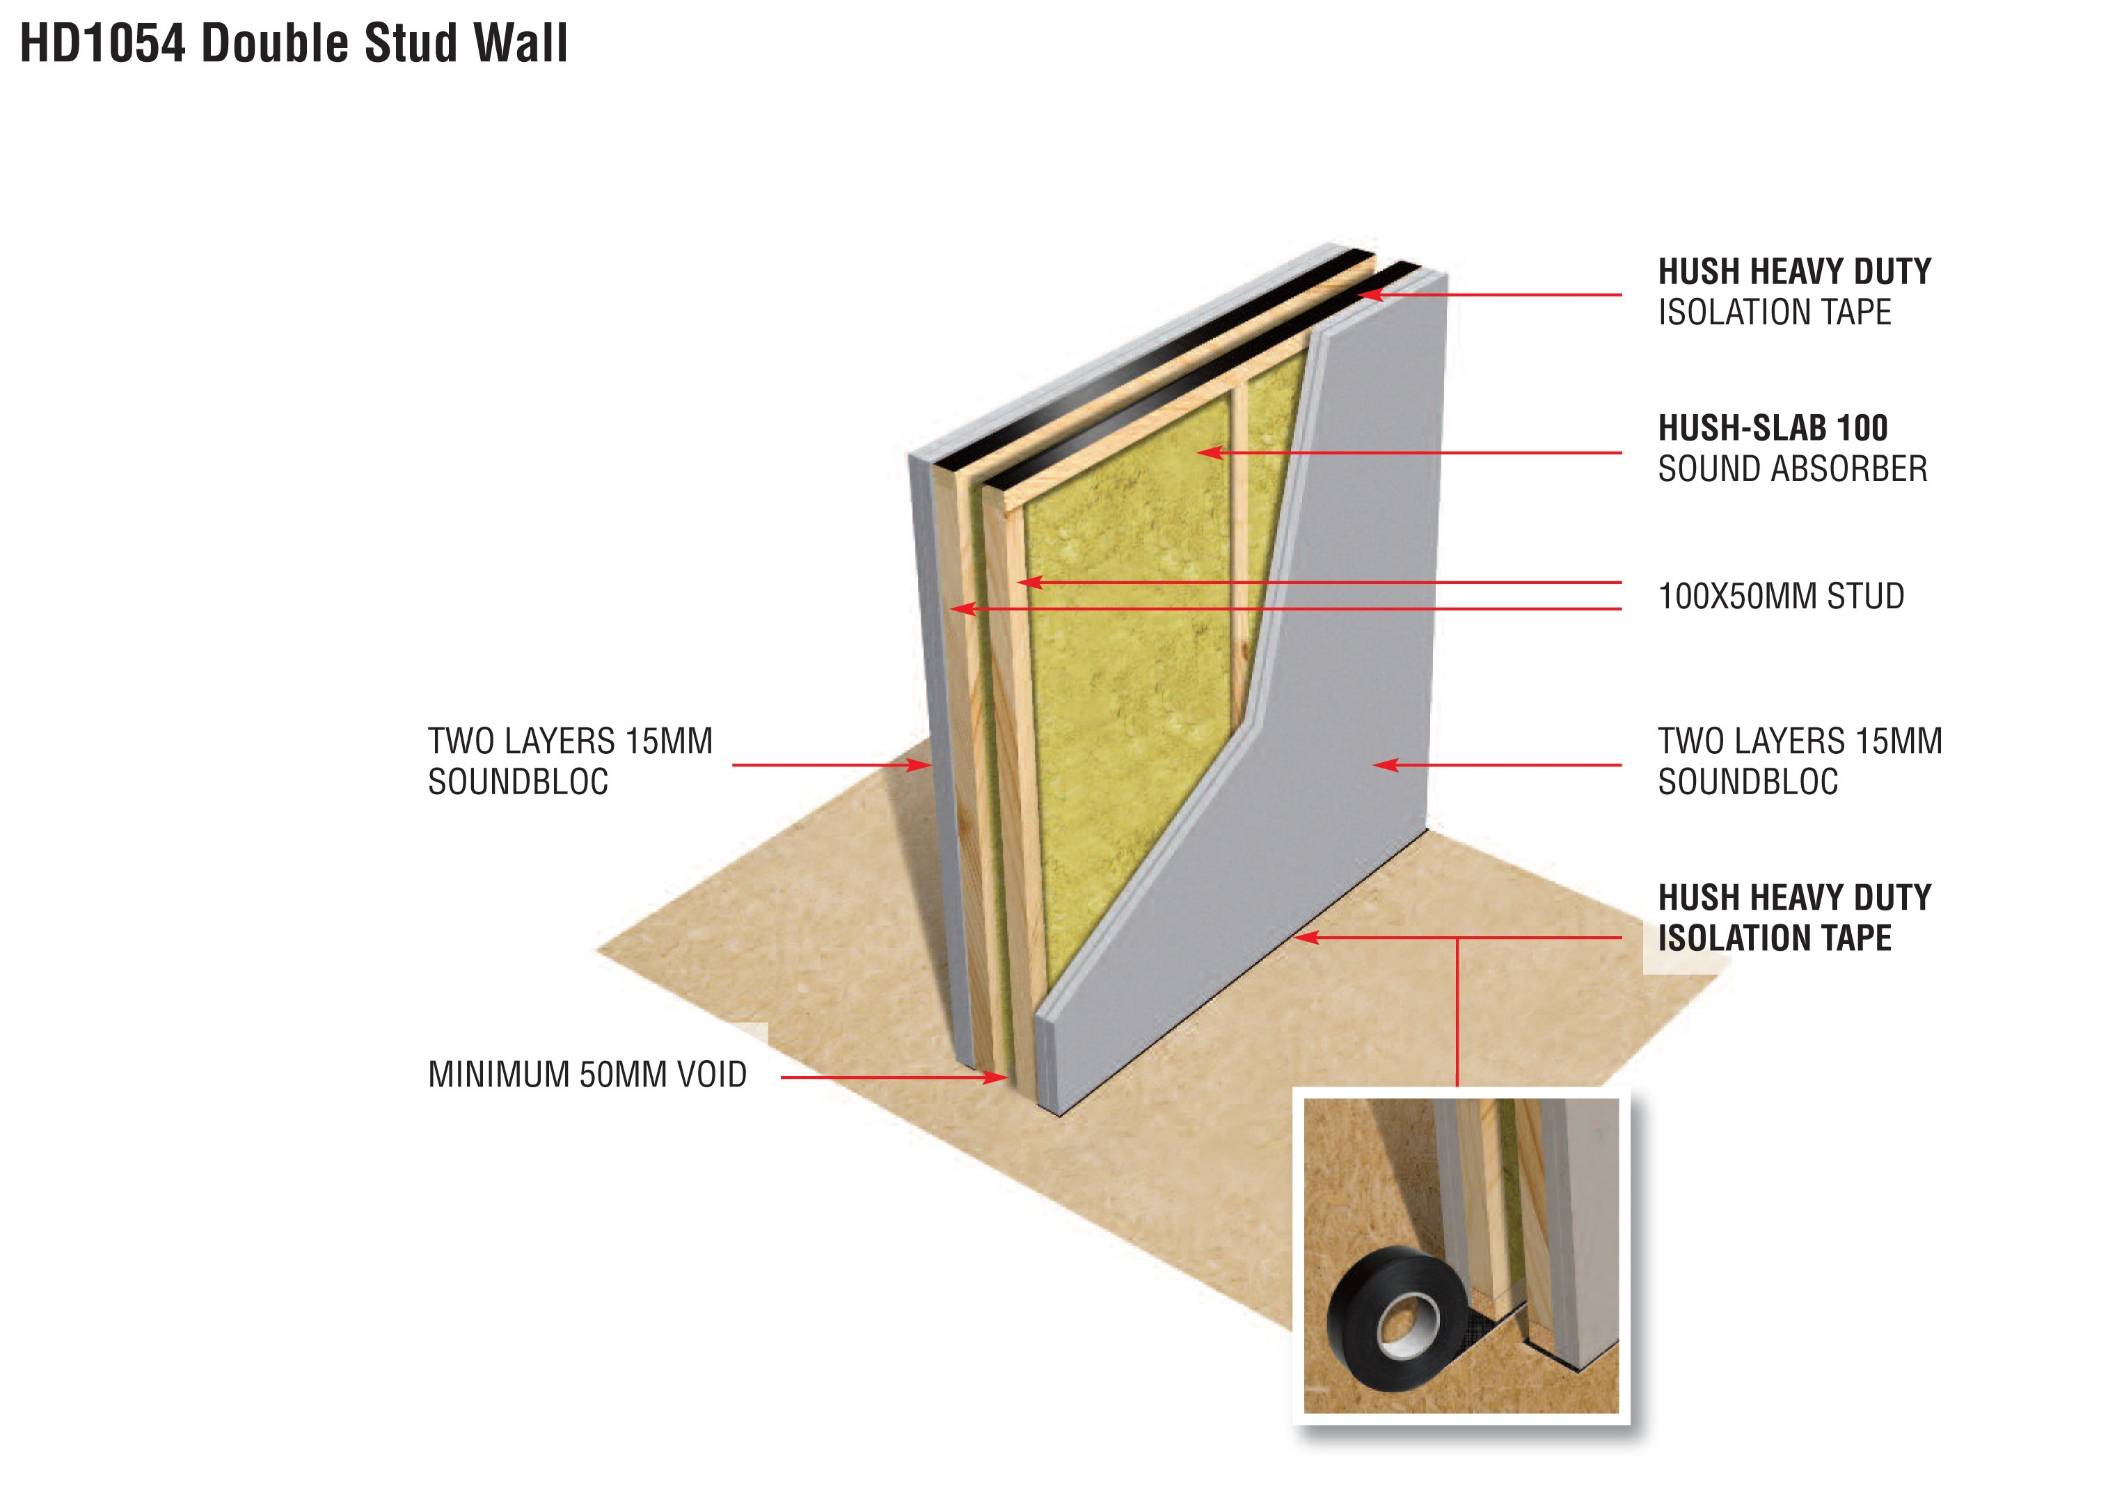 HD1054 Double Timber Stud Wall